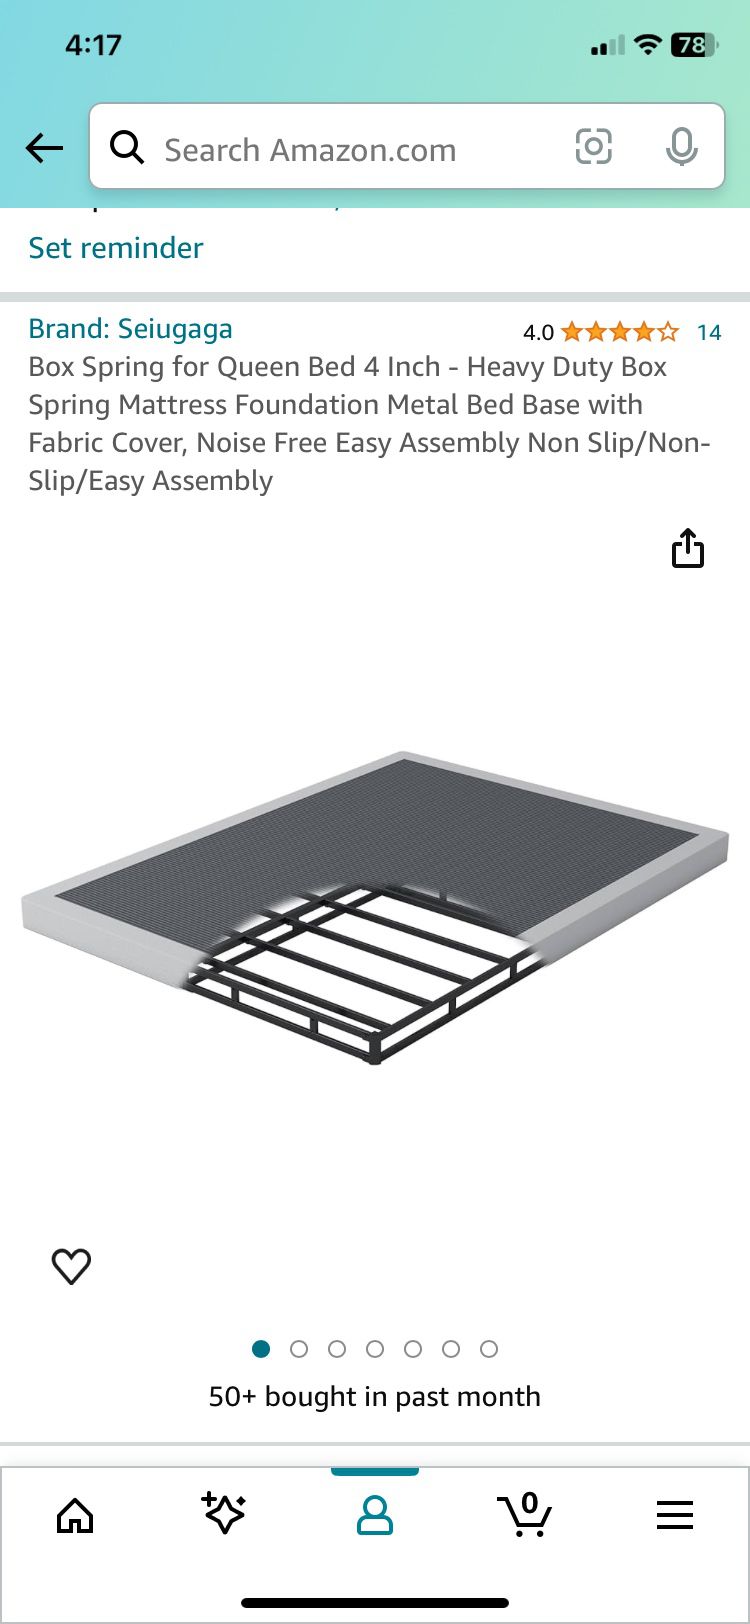 Box Spring for Queen Bed 4 Inch - Heavy Duty Box 